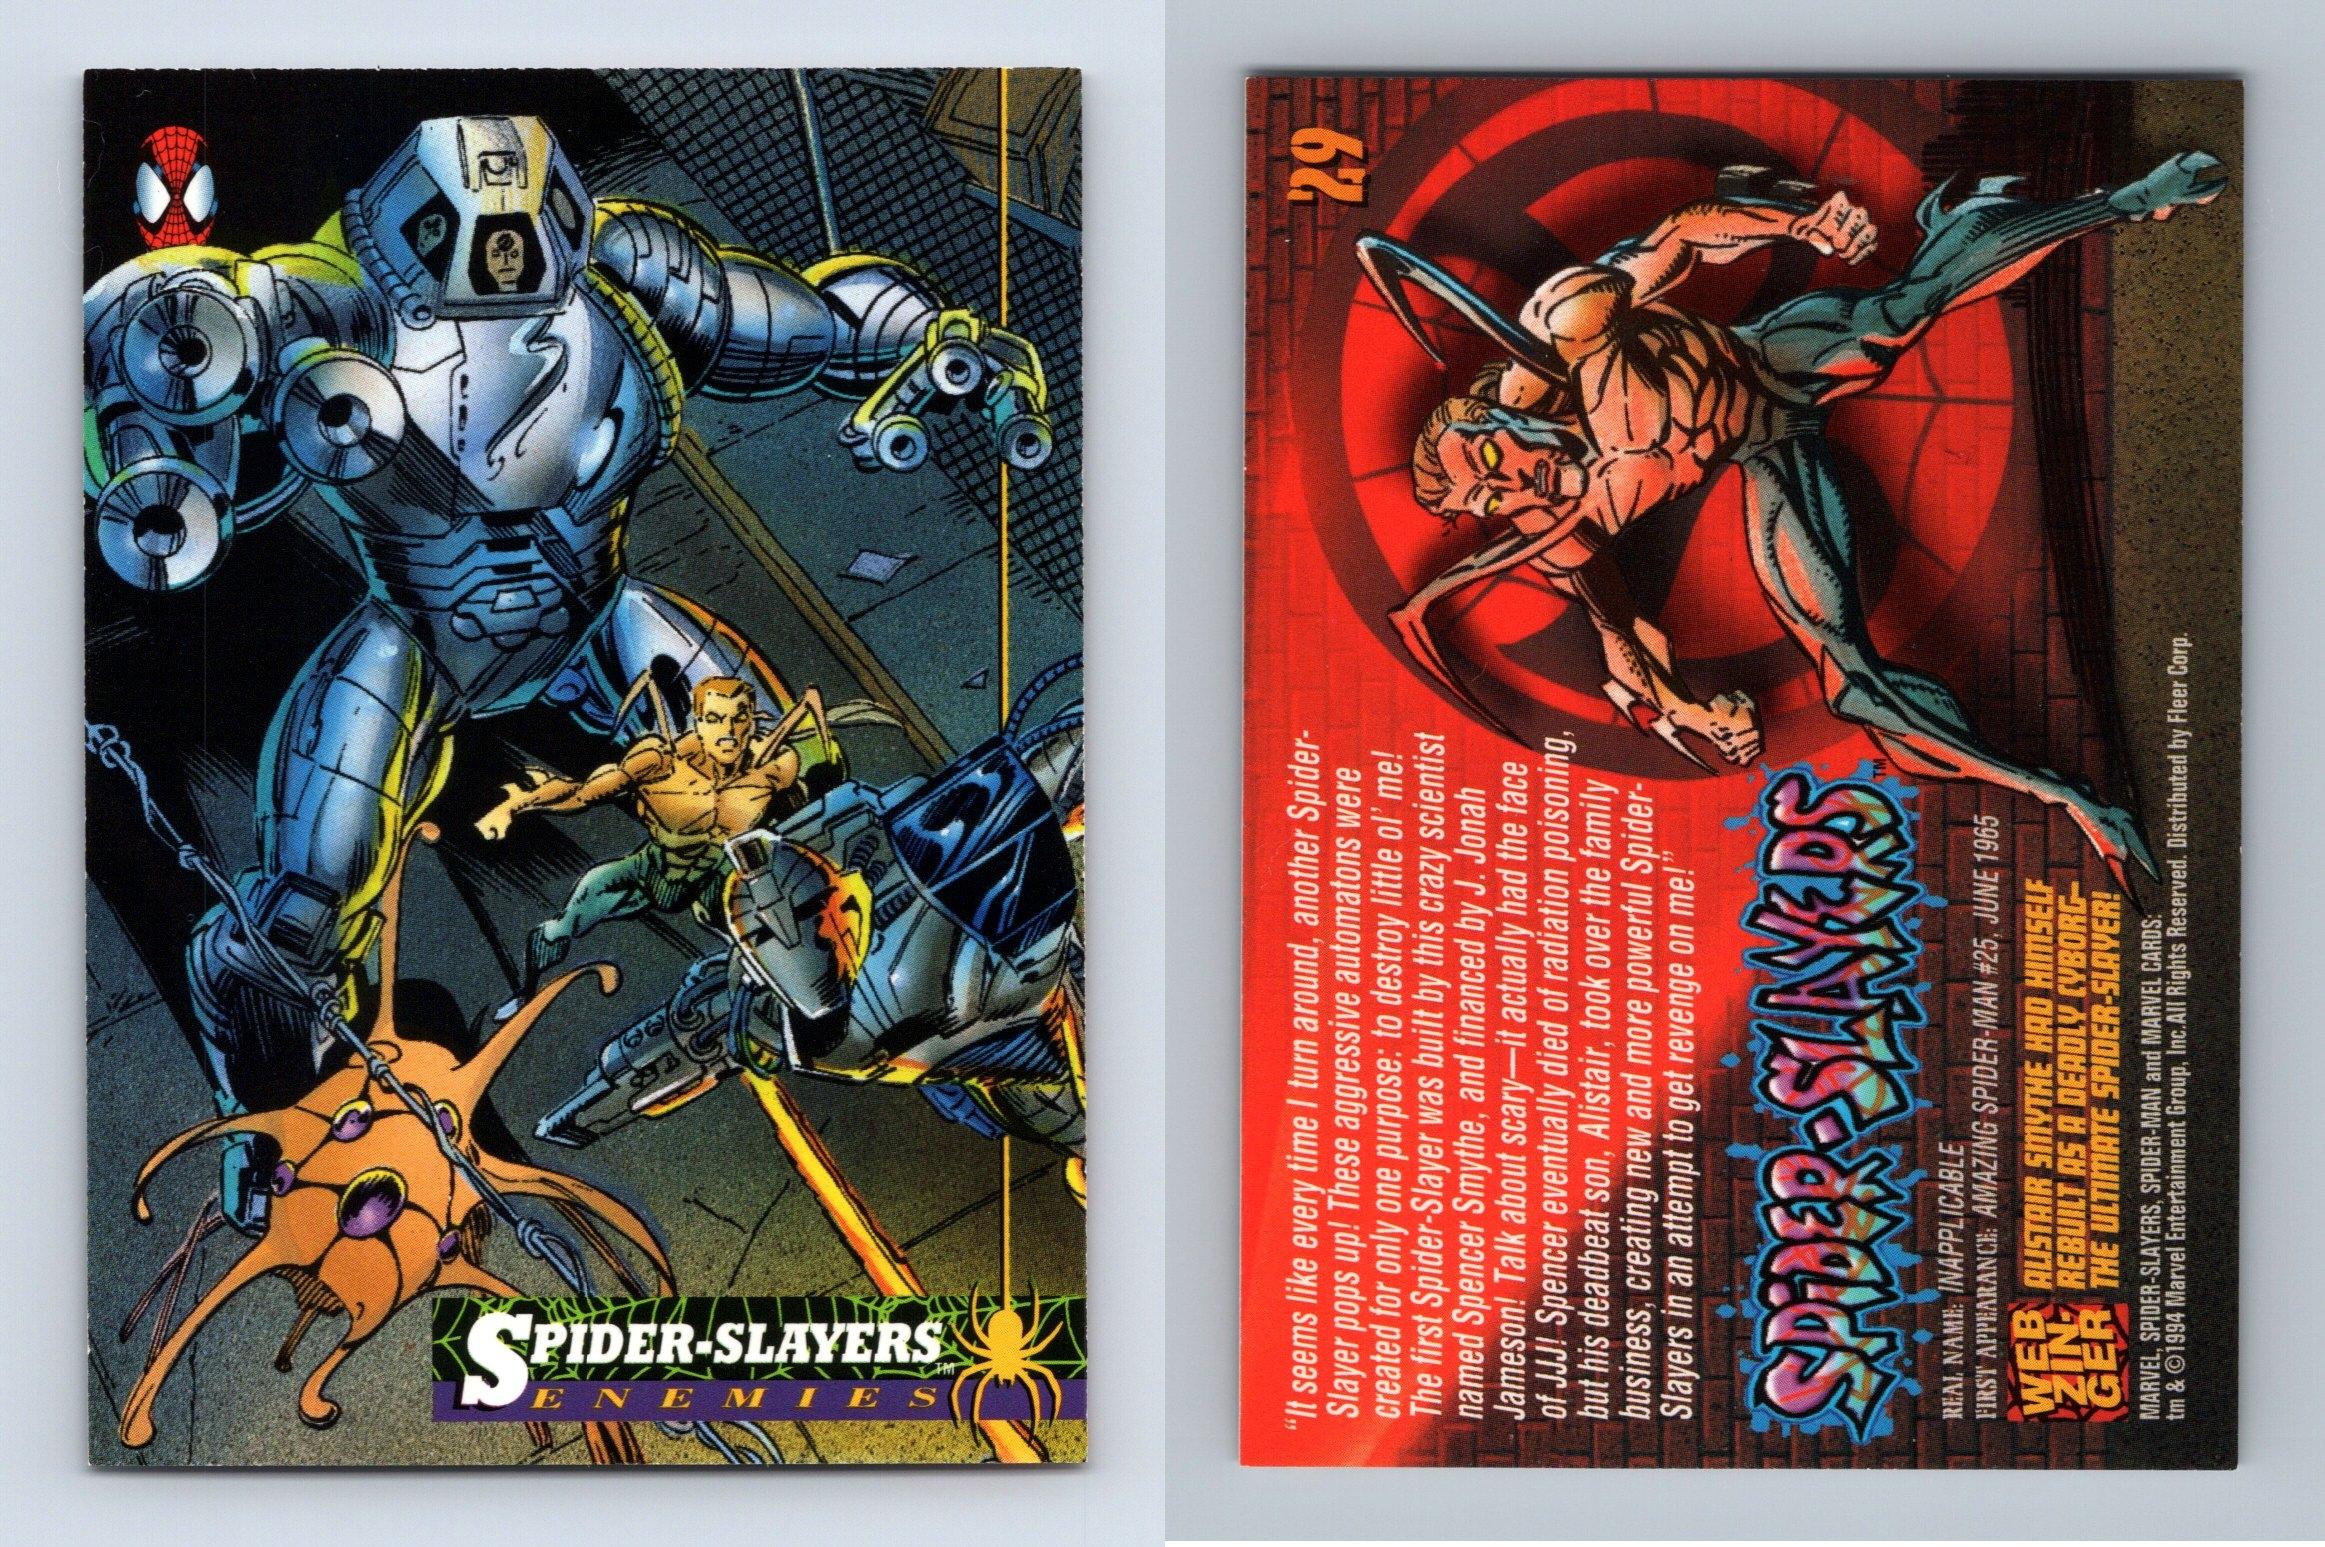 Spider-Slayers #29 The Amazing Spider-Man 1994 Fleer Trading Card